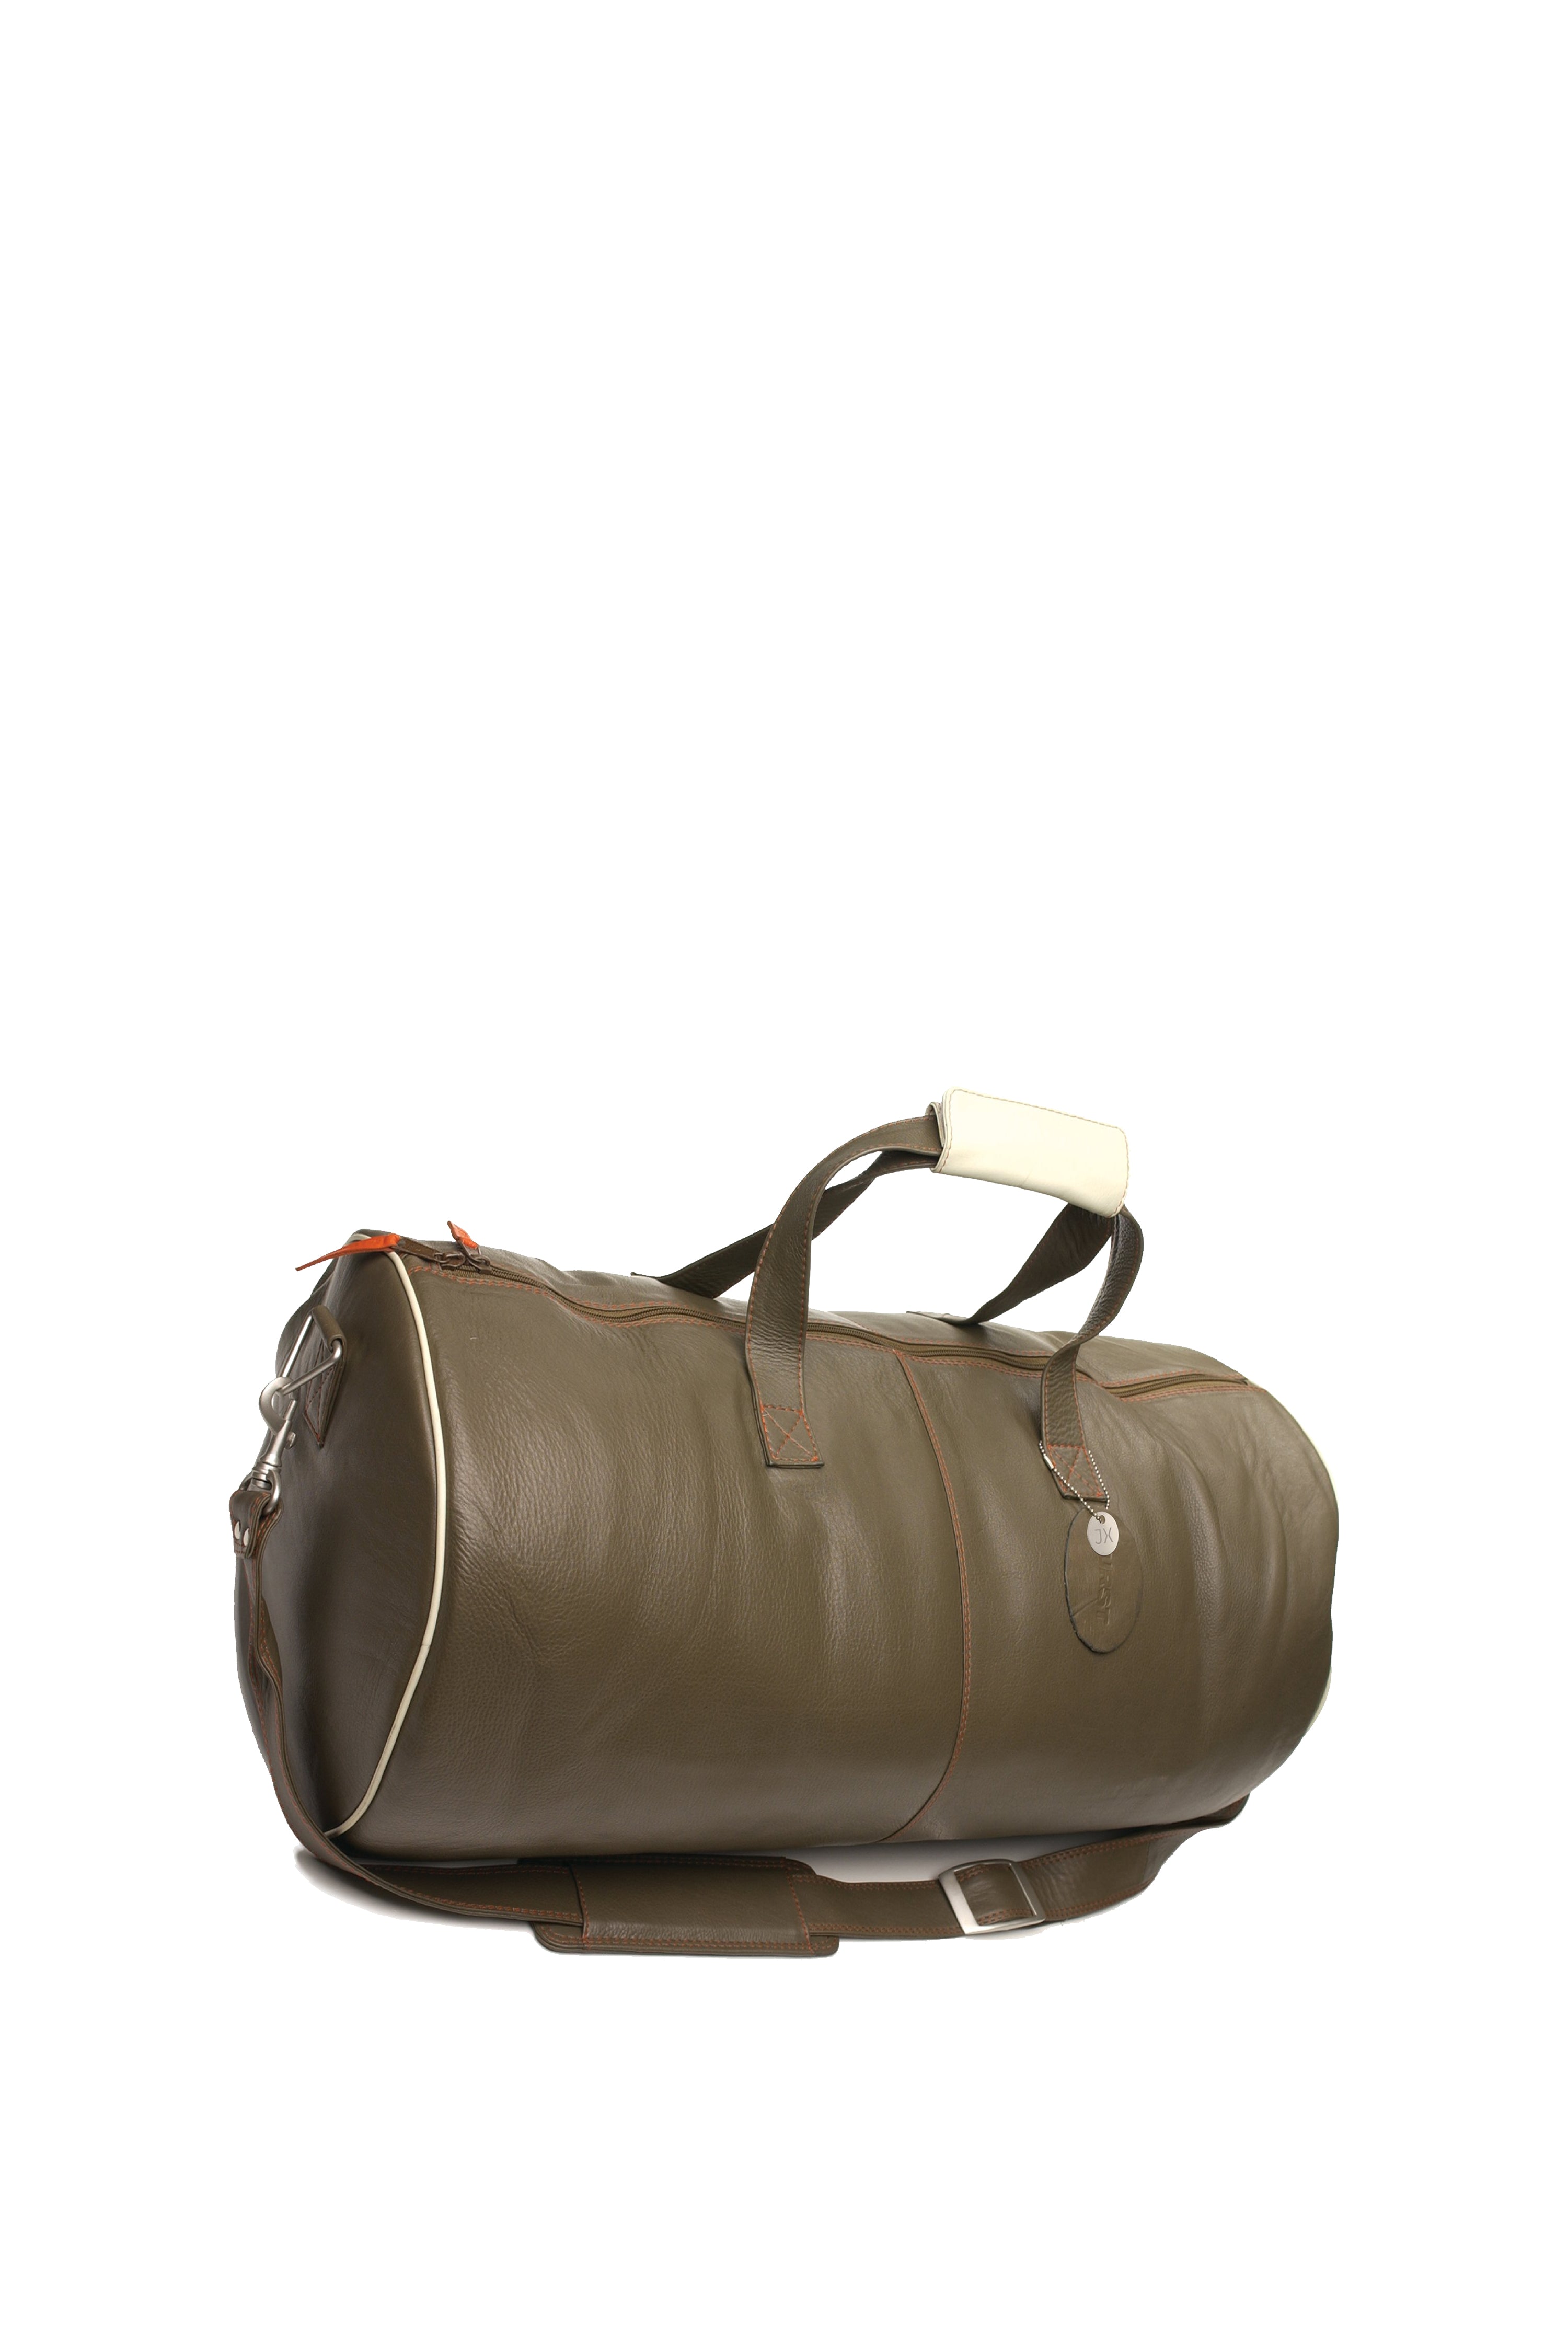  Pebbled soft leather round duffel bag, removable shoulder strap, handles. Olive with cream & orange accents. Upcycled Sustainable